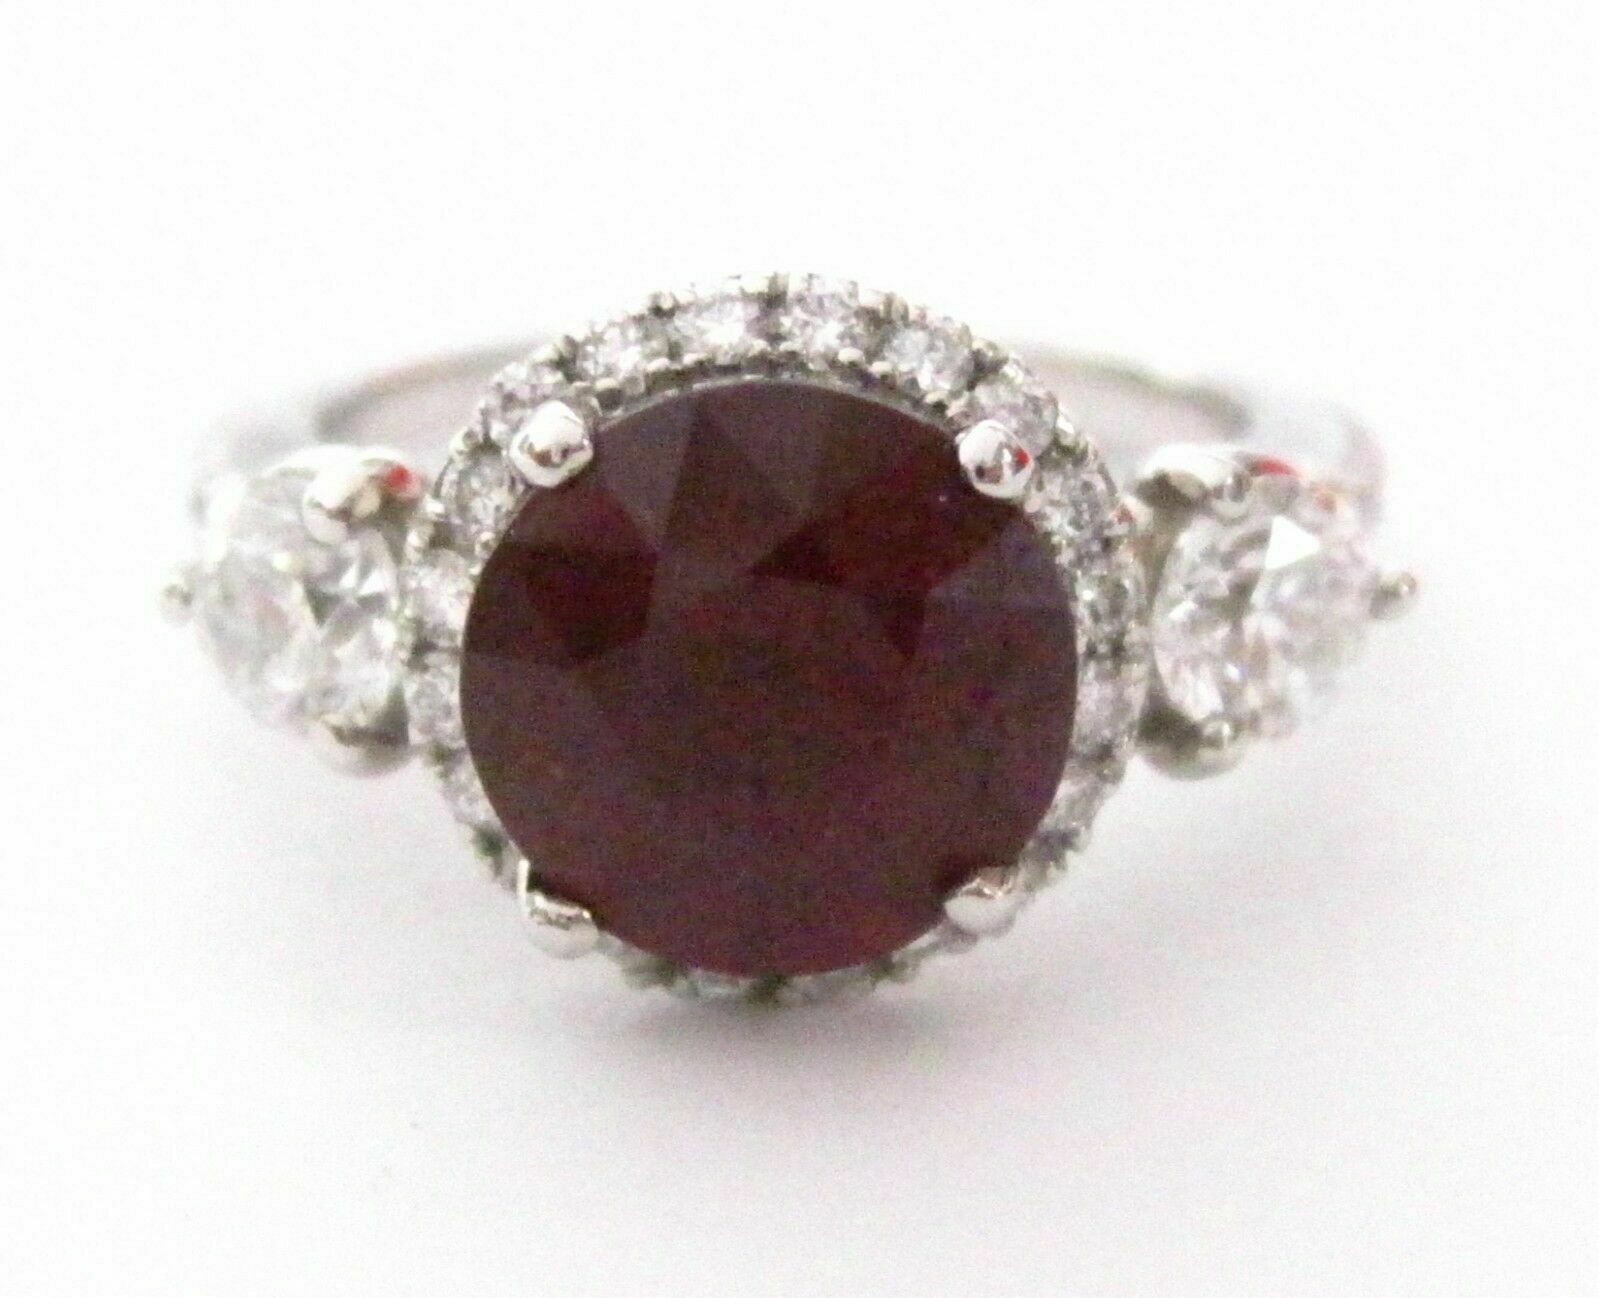 4.63 TCW Natural Three Roud Ruby w/ Diamond Accents Gem Ring 14k White Gold